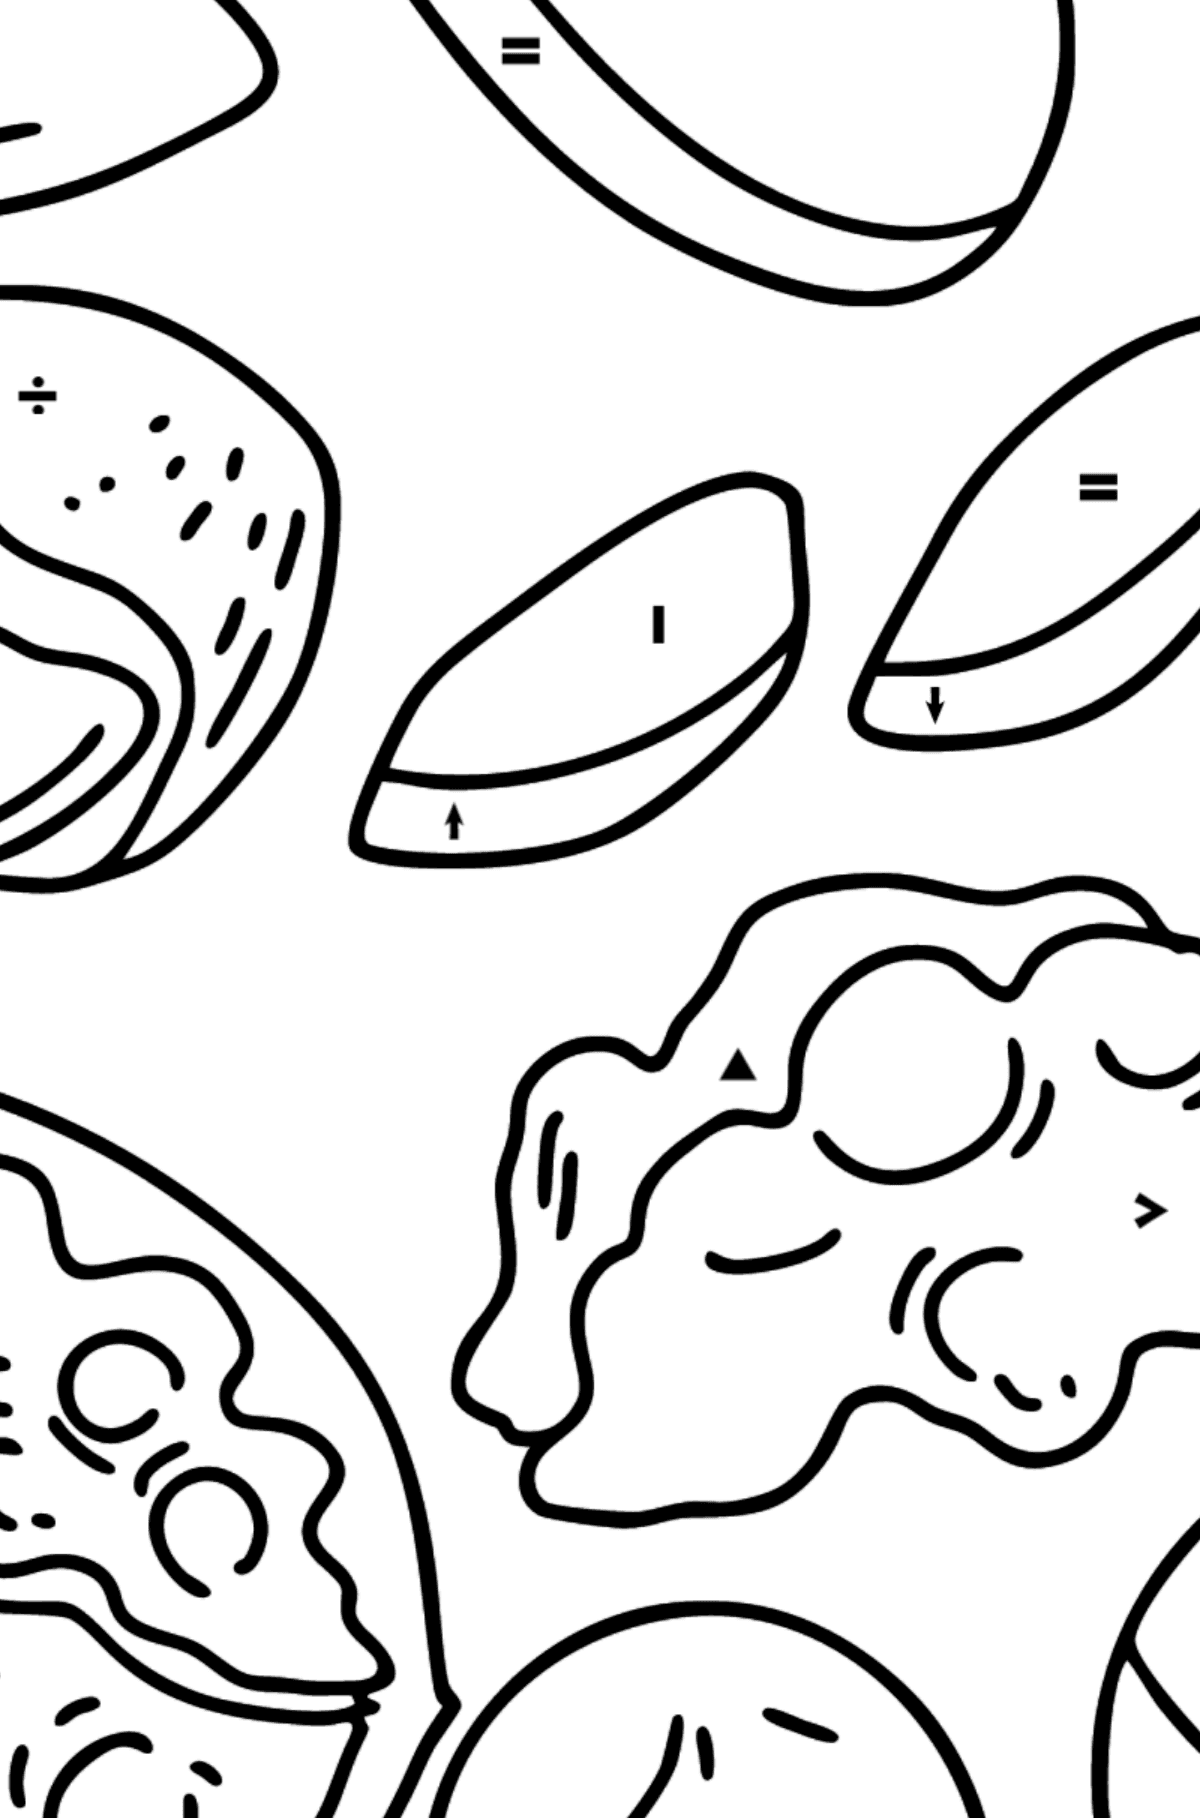 Nuts: Walnuts, Macadamia, Almonds and Peanuts coloring page - Coloring by Symbols for Kids